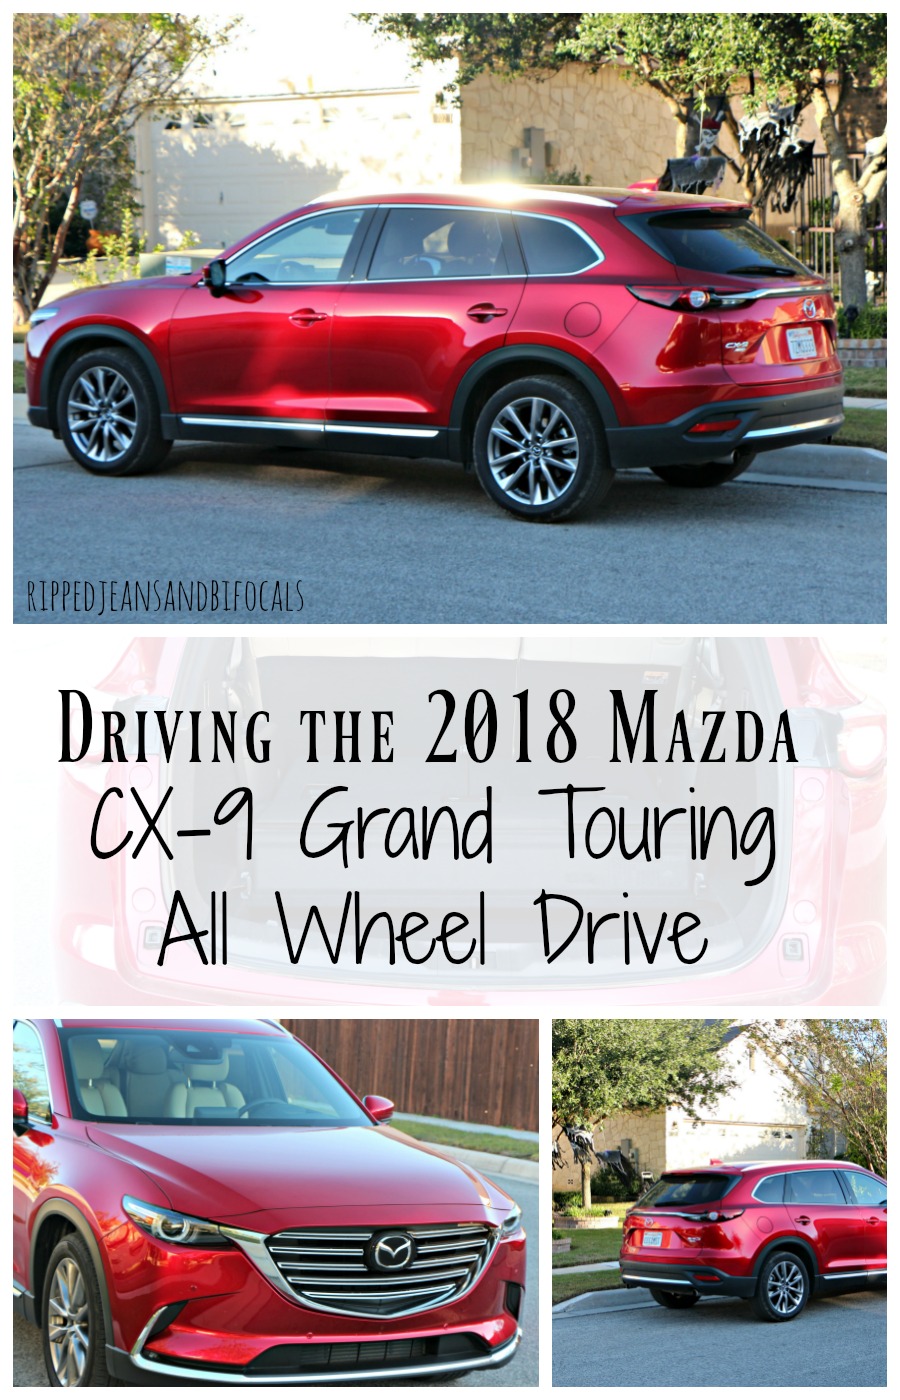 mazda-cx9-ripped-jeans-and-bifocals-pin.jpg